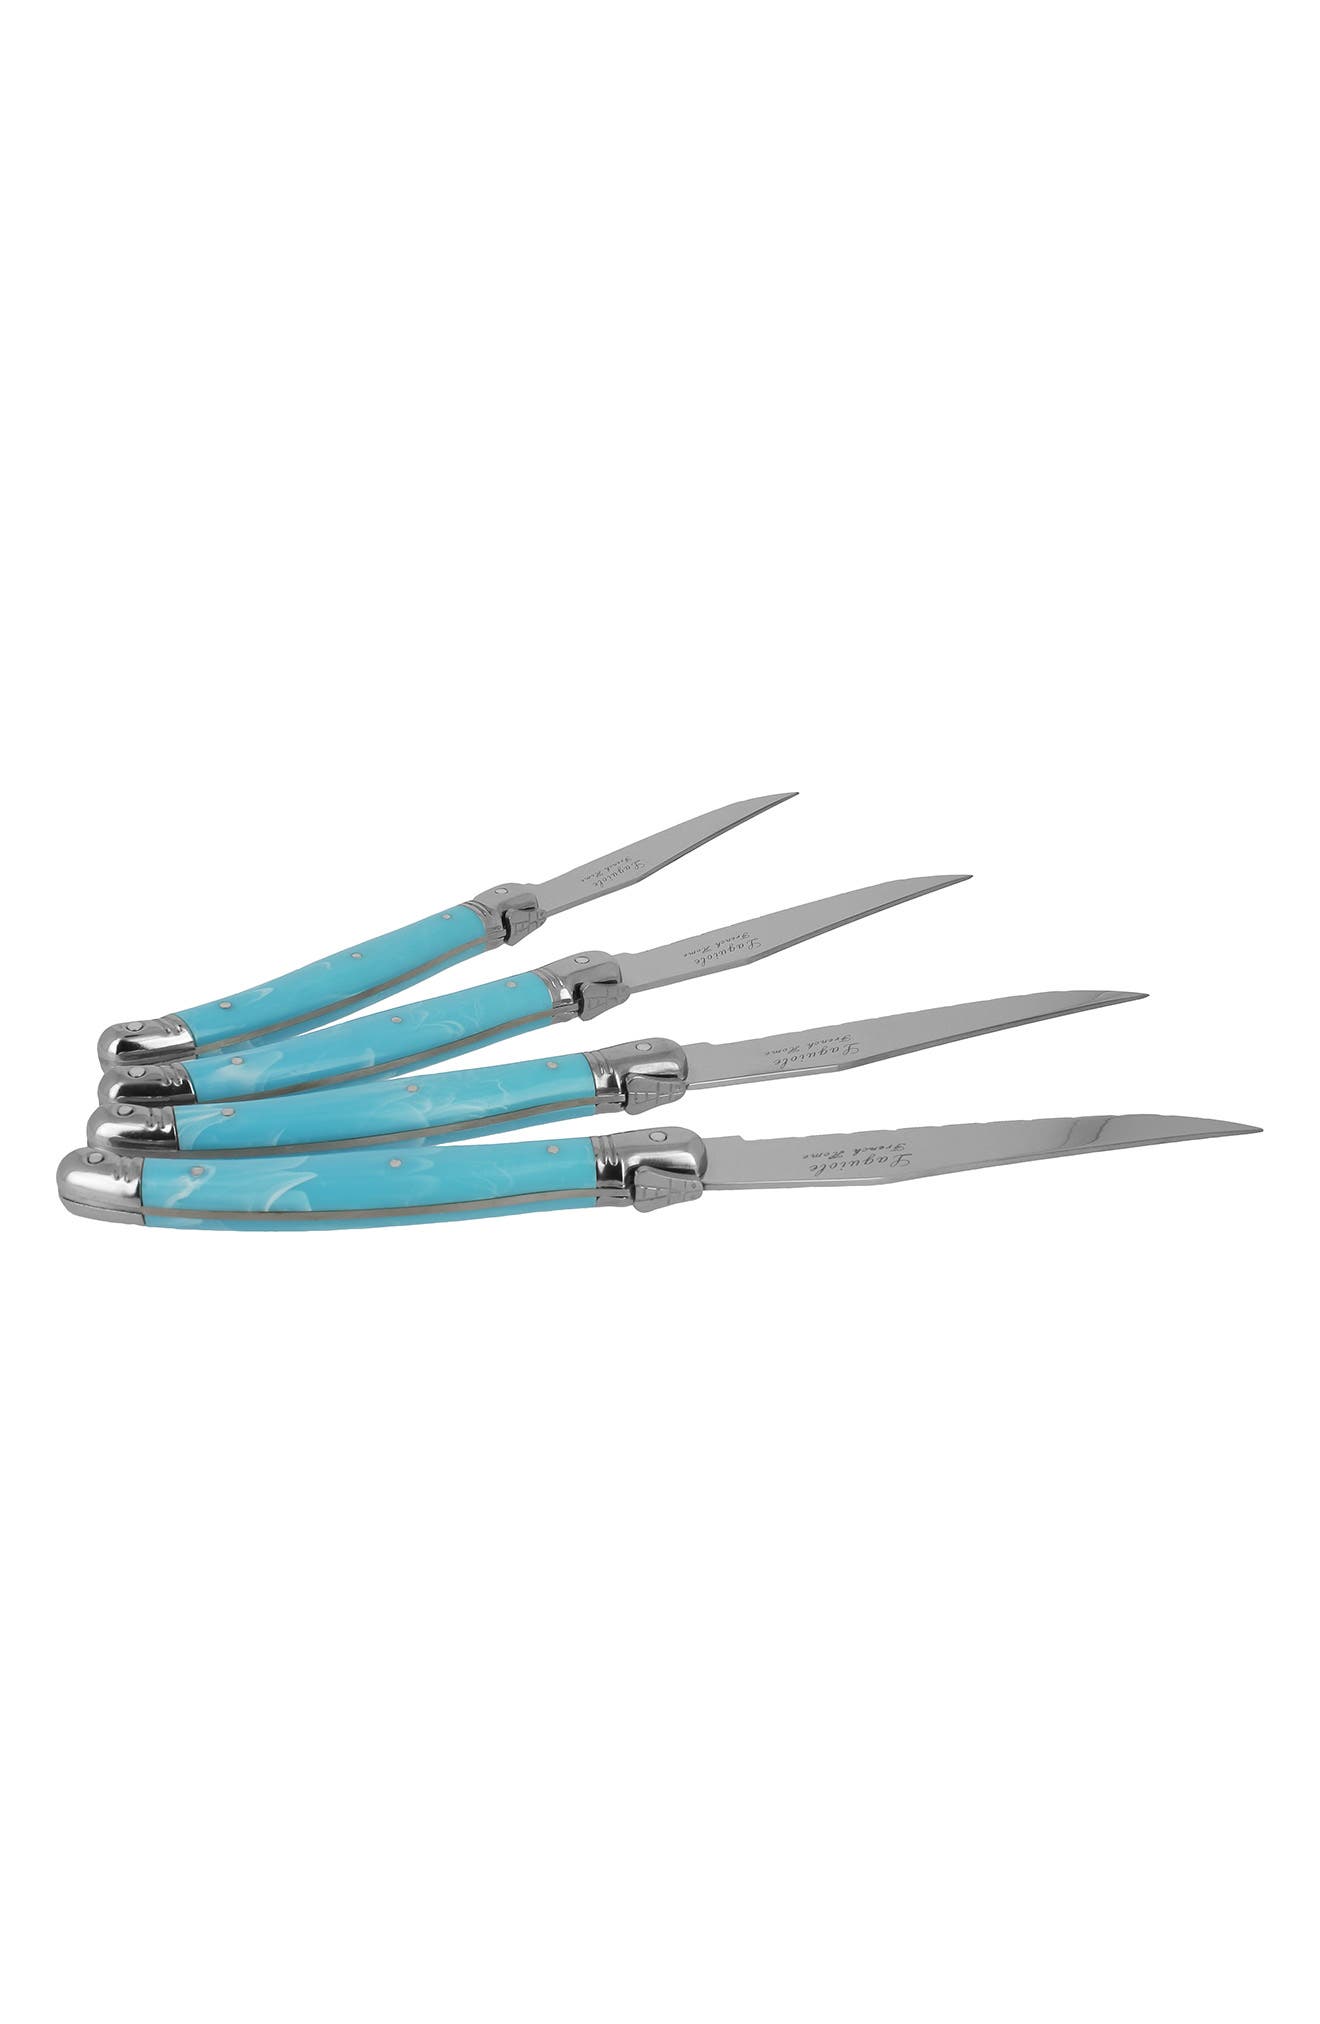 French Home Laguiole Steak Knives In Turquoise